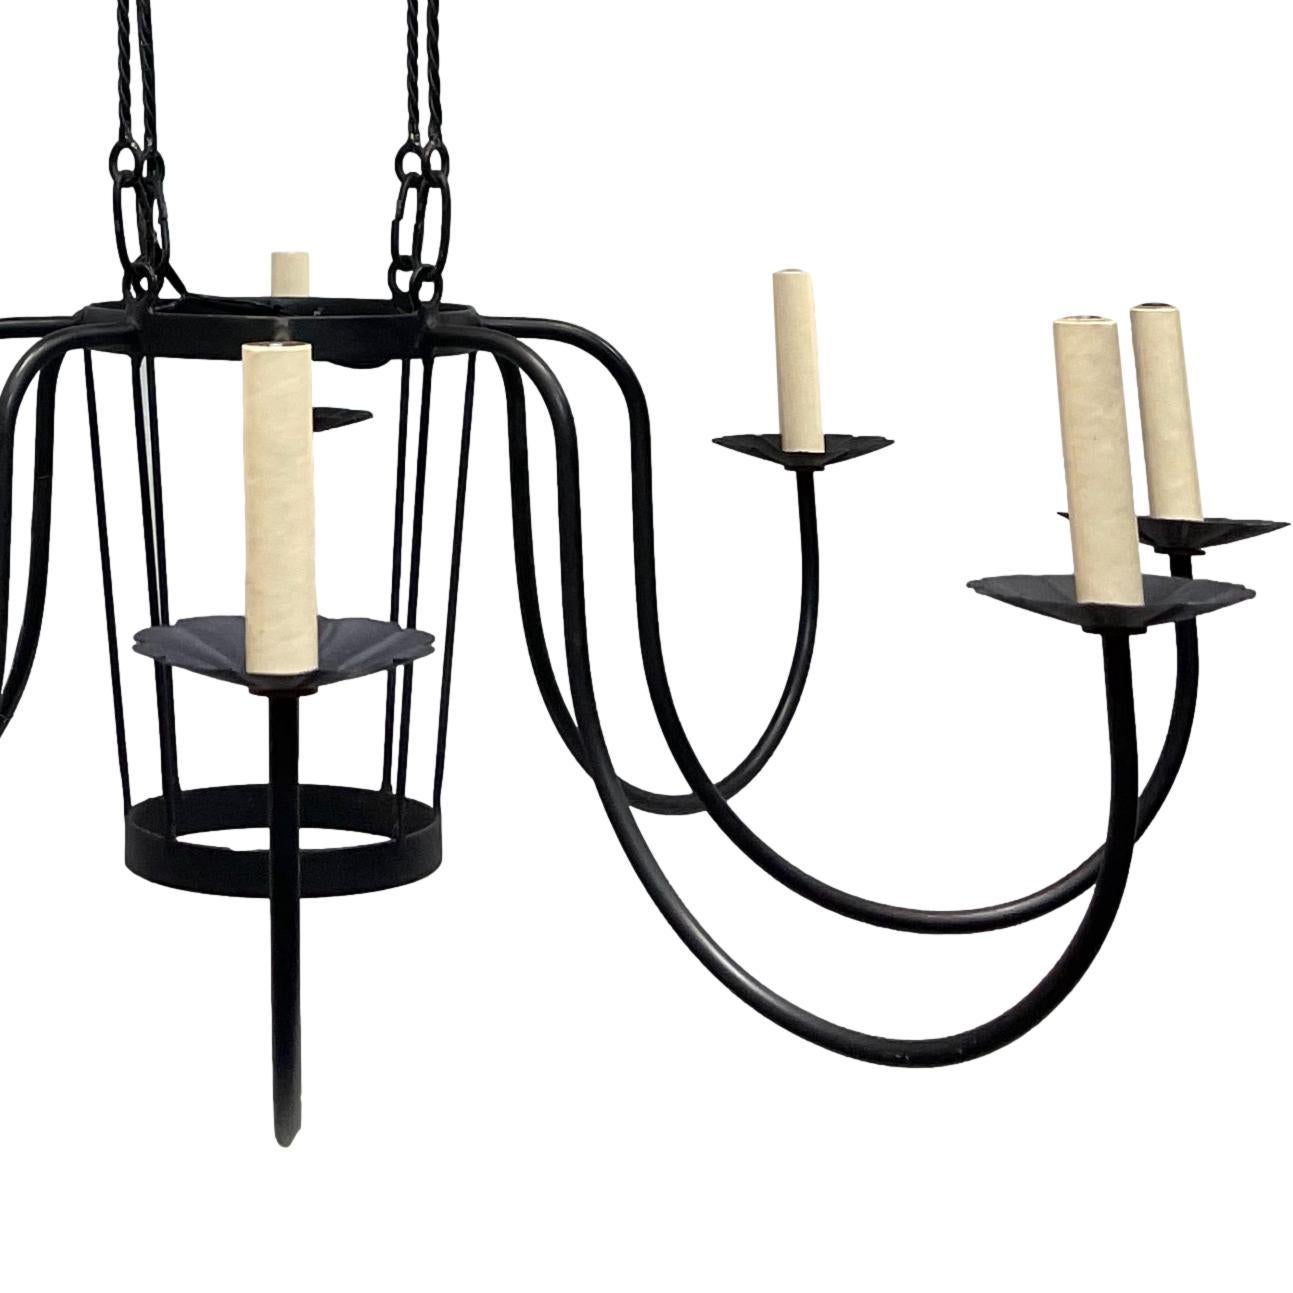 A French circa 1970's painted air balloon eight-light chandelier with wrought iron arms.

Measurements:
Drop: 66